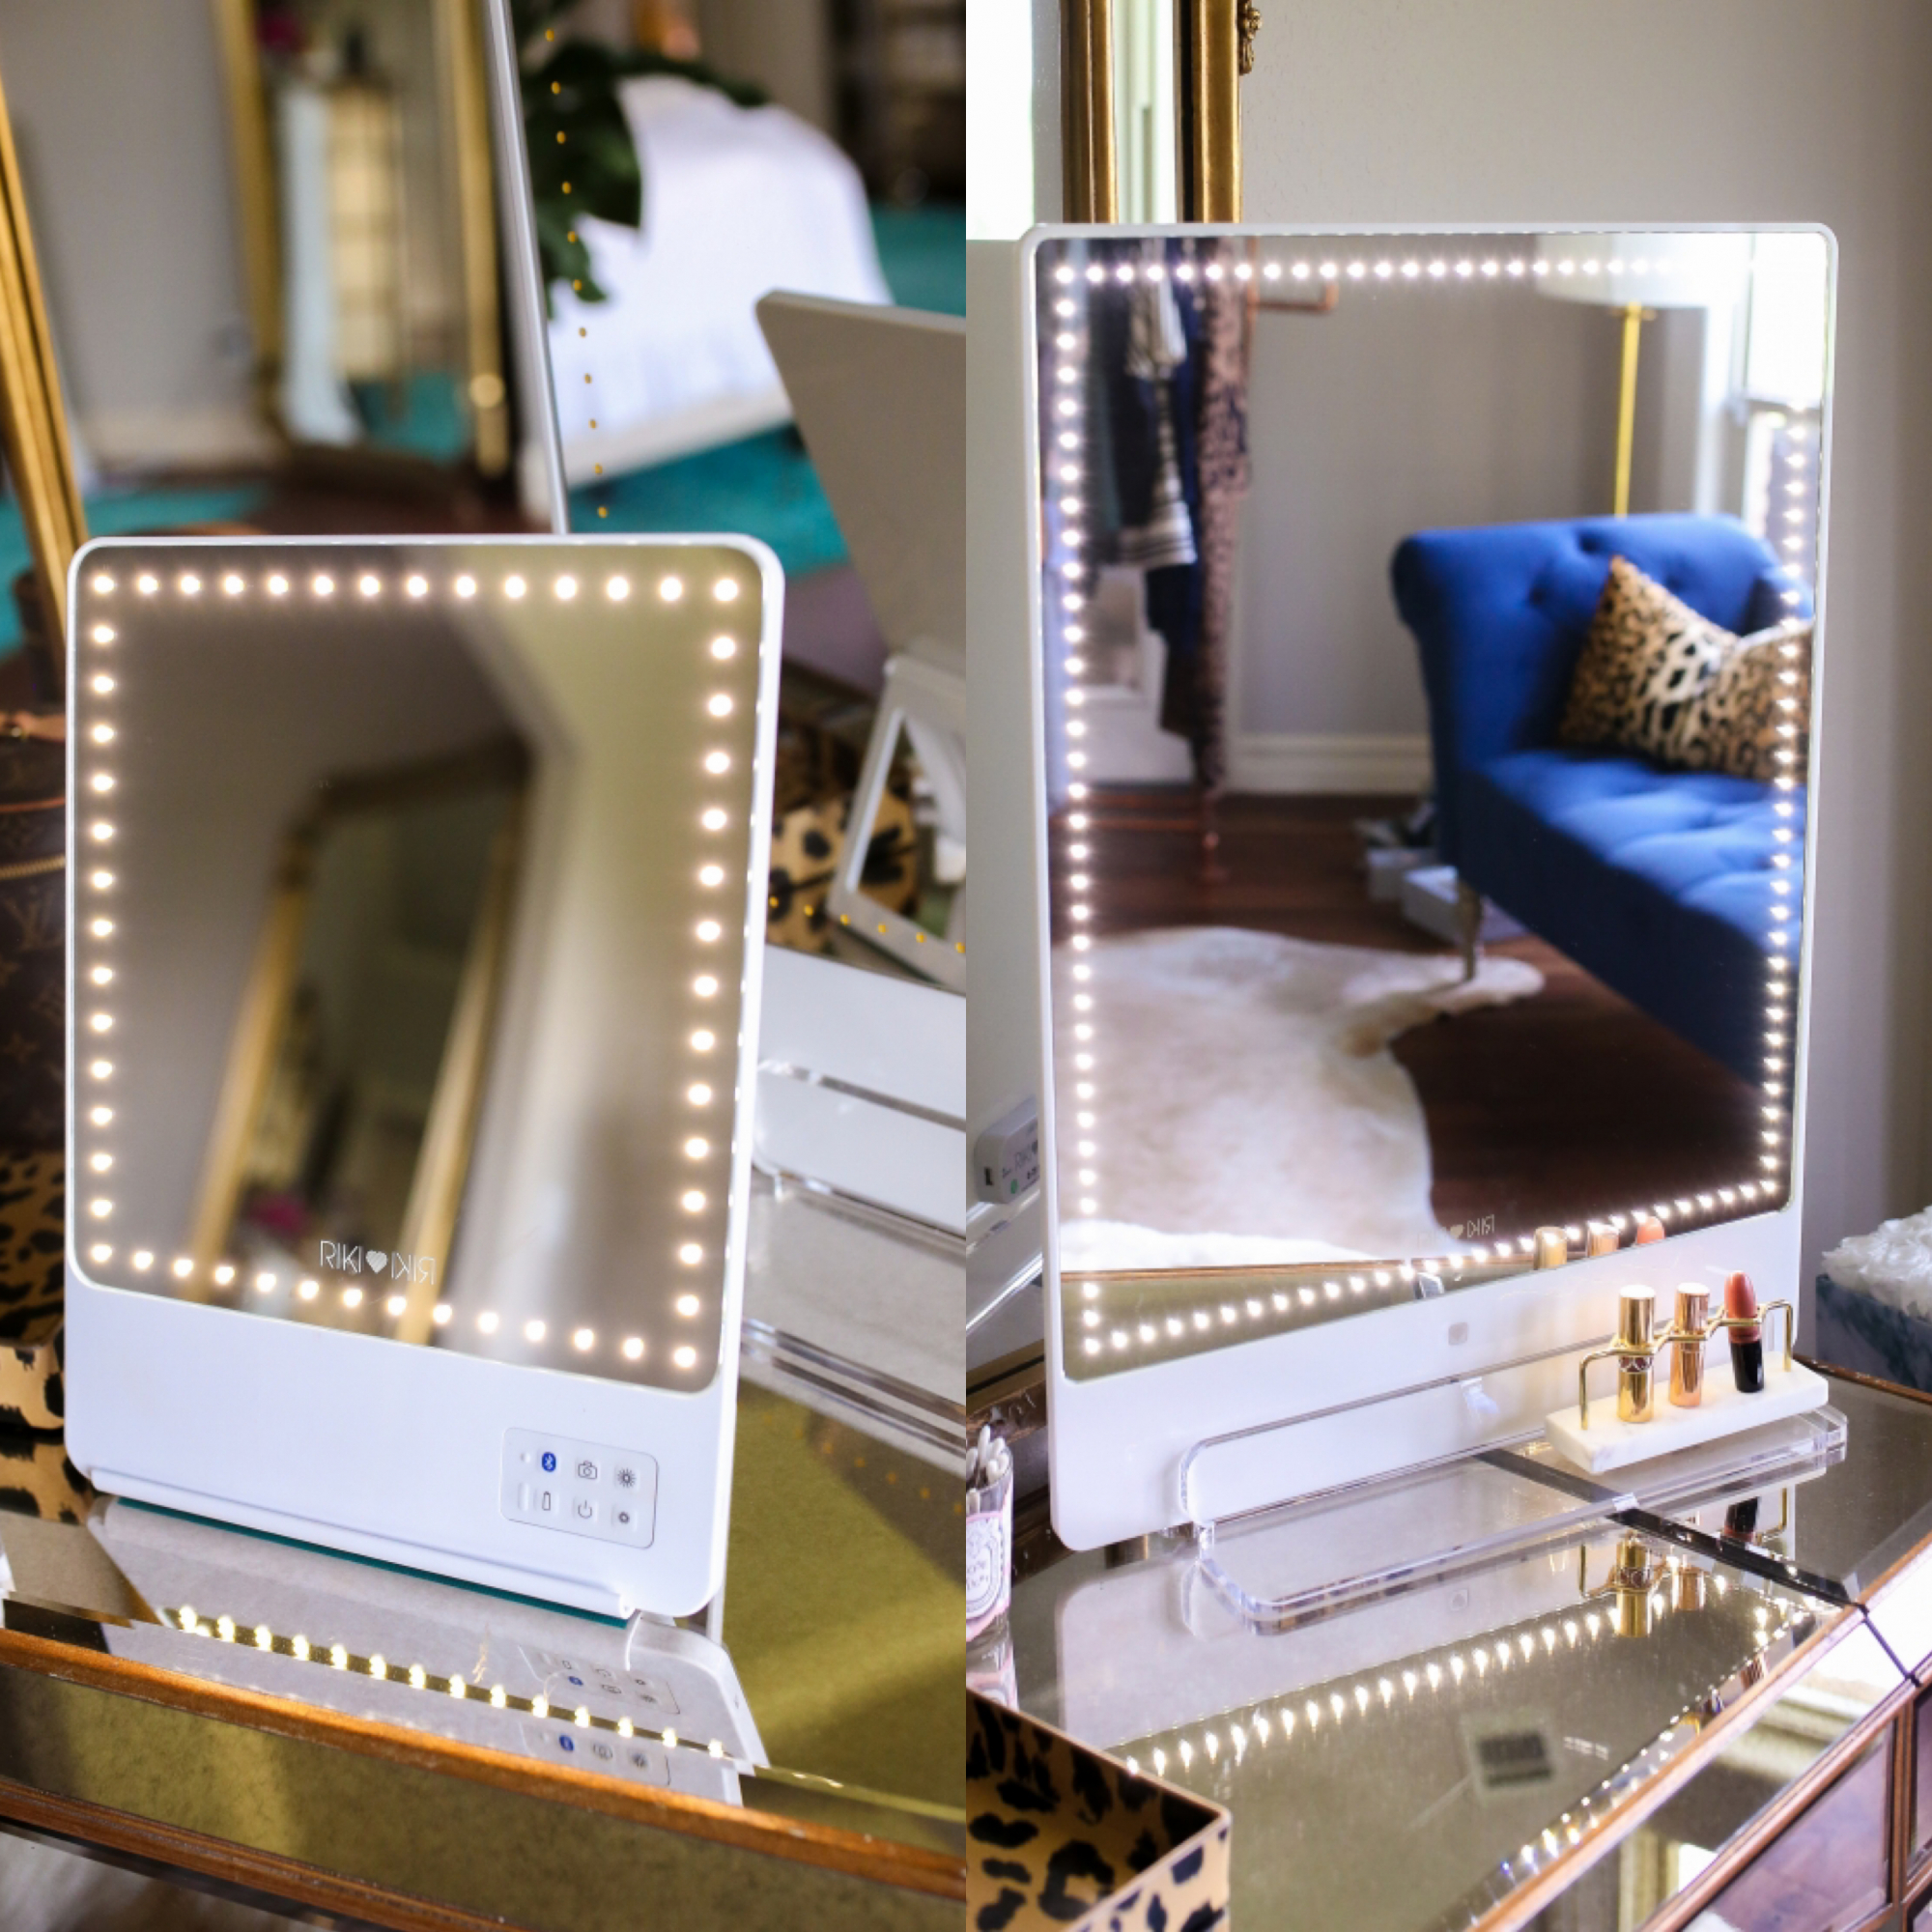 Mega Black Friday Sales and Deals Guide!! by popular Oklahoma life and style blog, The Sweetest Thing: collage image of Riki mirrors